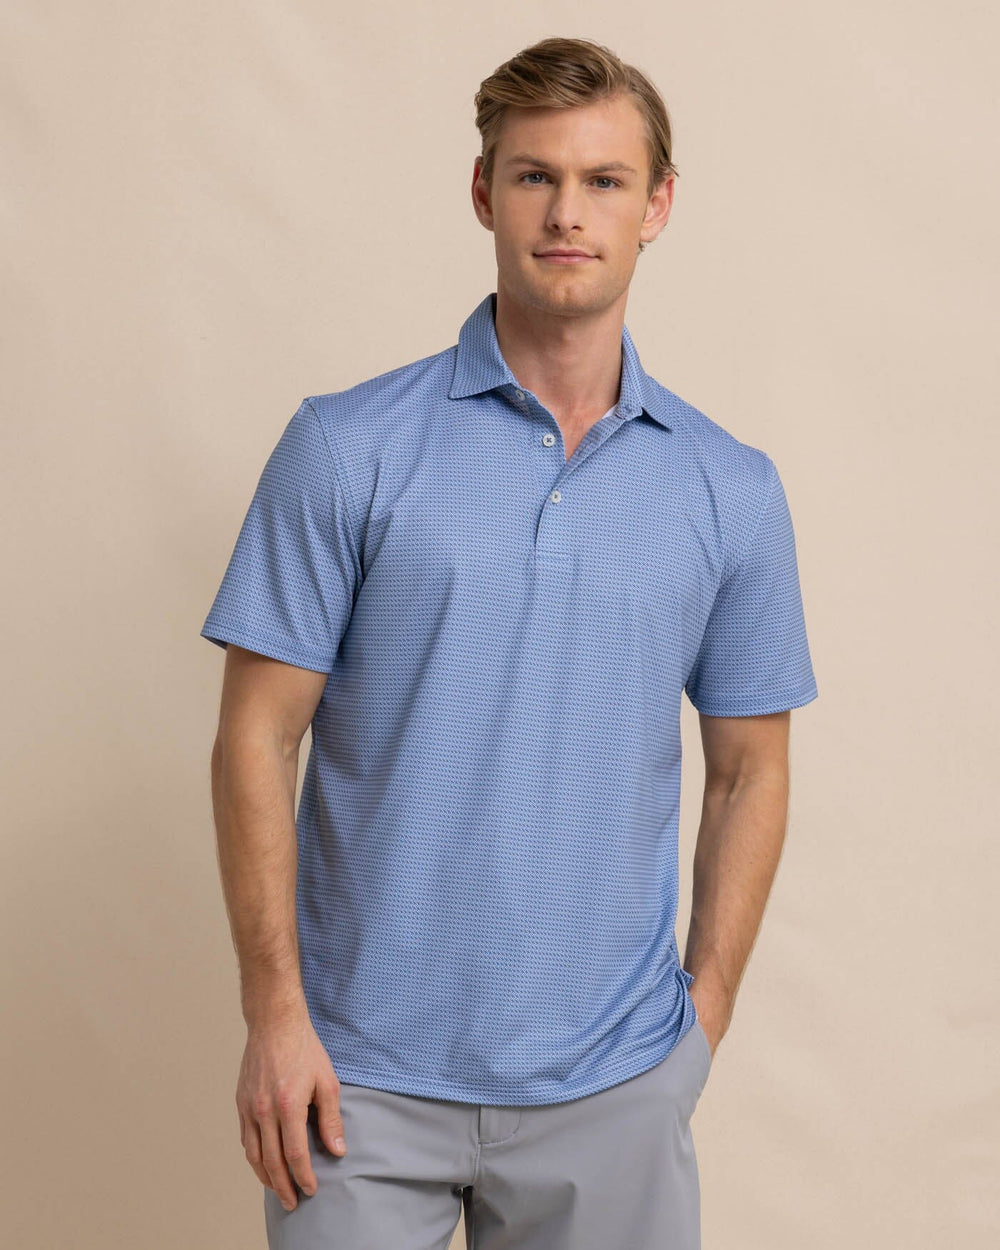 The front view of the Southern Tide Driver Getting Ziggy With It Printed Polo by Southern Tide - Coronet Blue